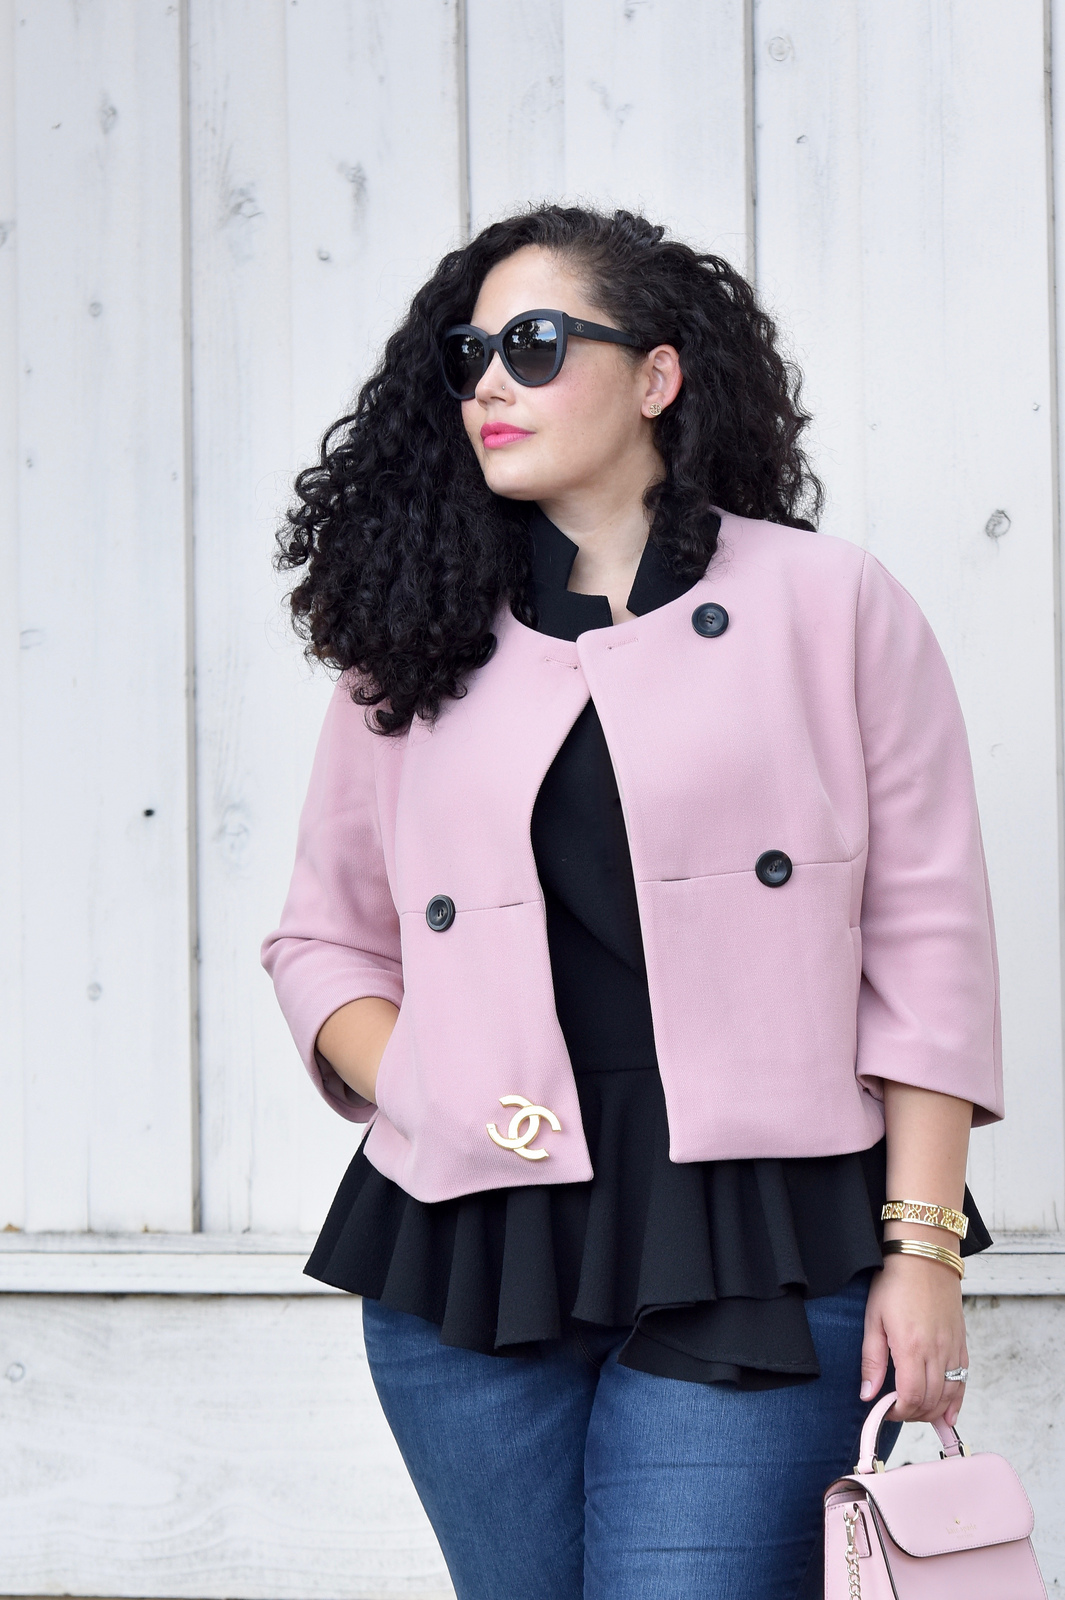 Girl With Curves blogger Tanesha Awasthi wears a pink cropped jacket, peplum top, skinny jeans.